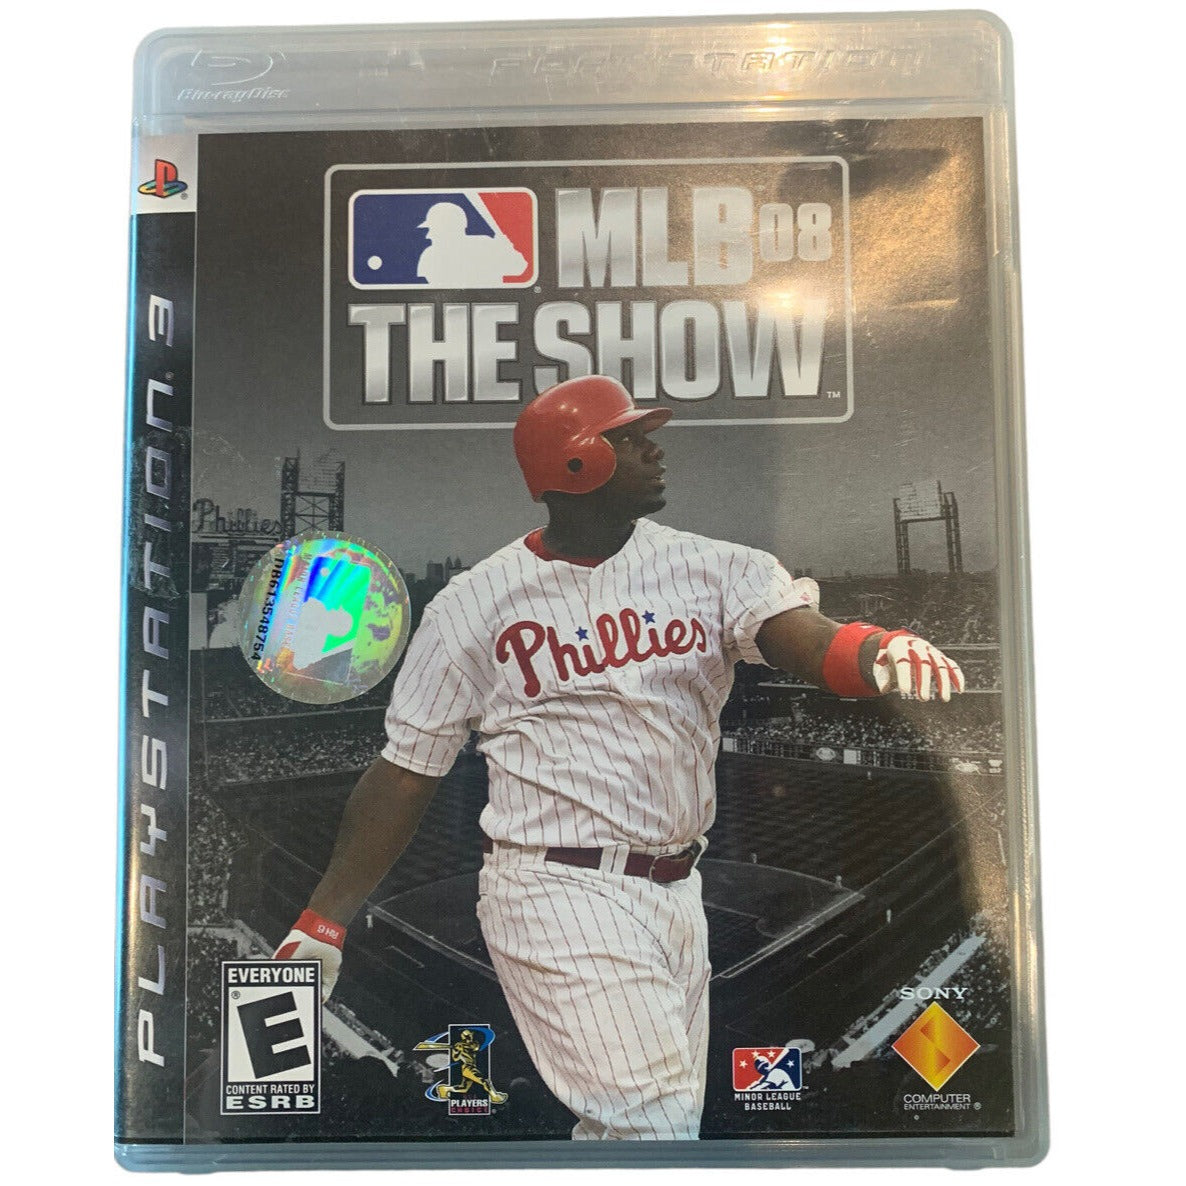 front of case cover with the video game title and image of a baseball player